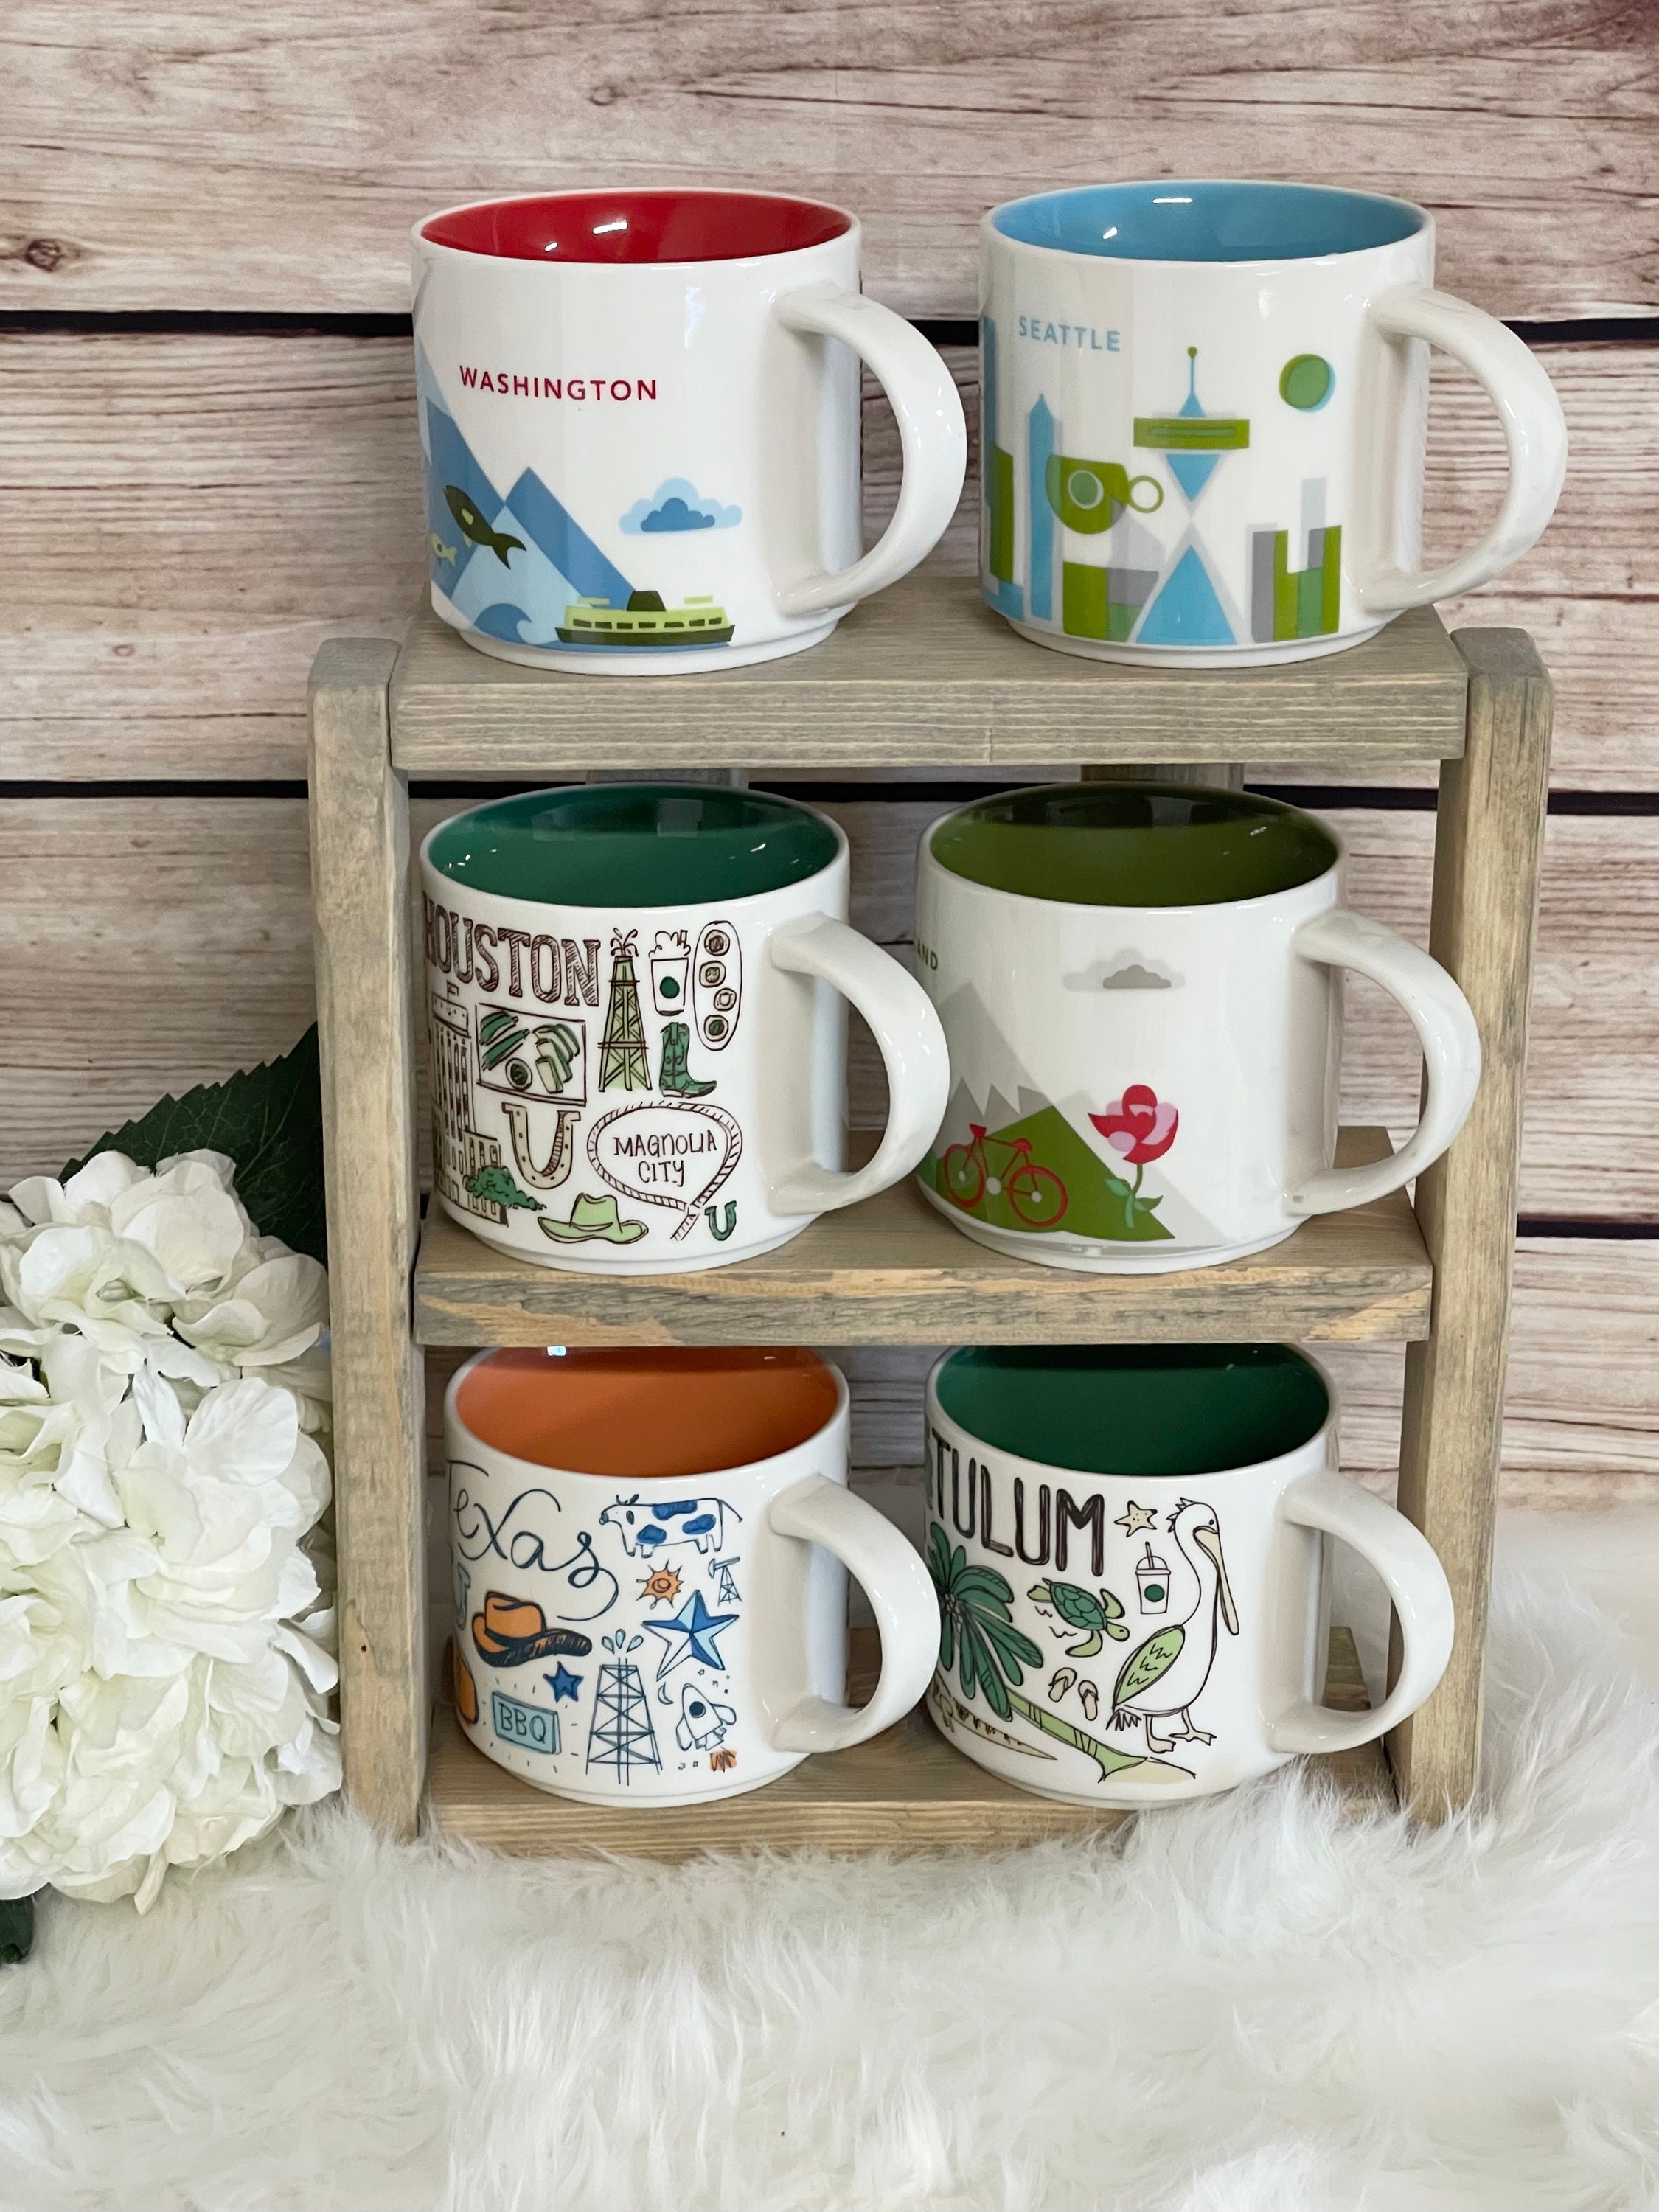 4 Pcs Creative Plant Appearance Mug Rack Drink Coaster Bottle Drying Rack Stand Coffee Tea Cup Mug Cup Holder Drainer for Your Table or Desk Drying Cup Holder Utensils Cup Dryer Tray 